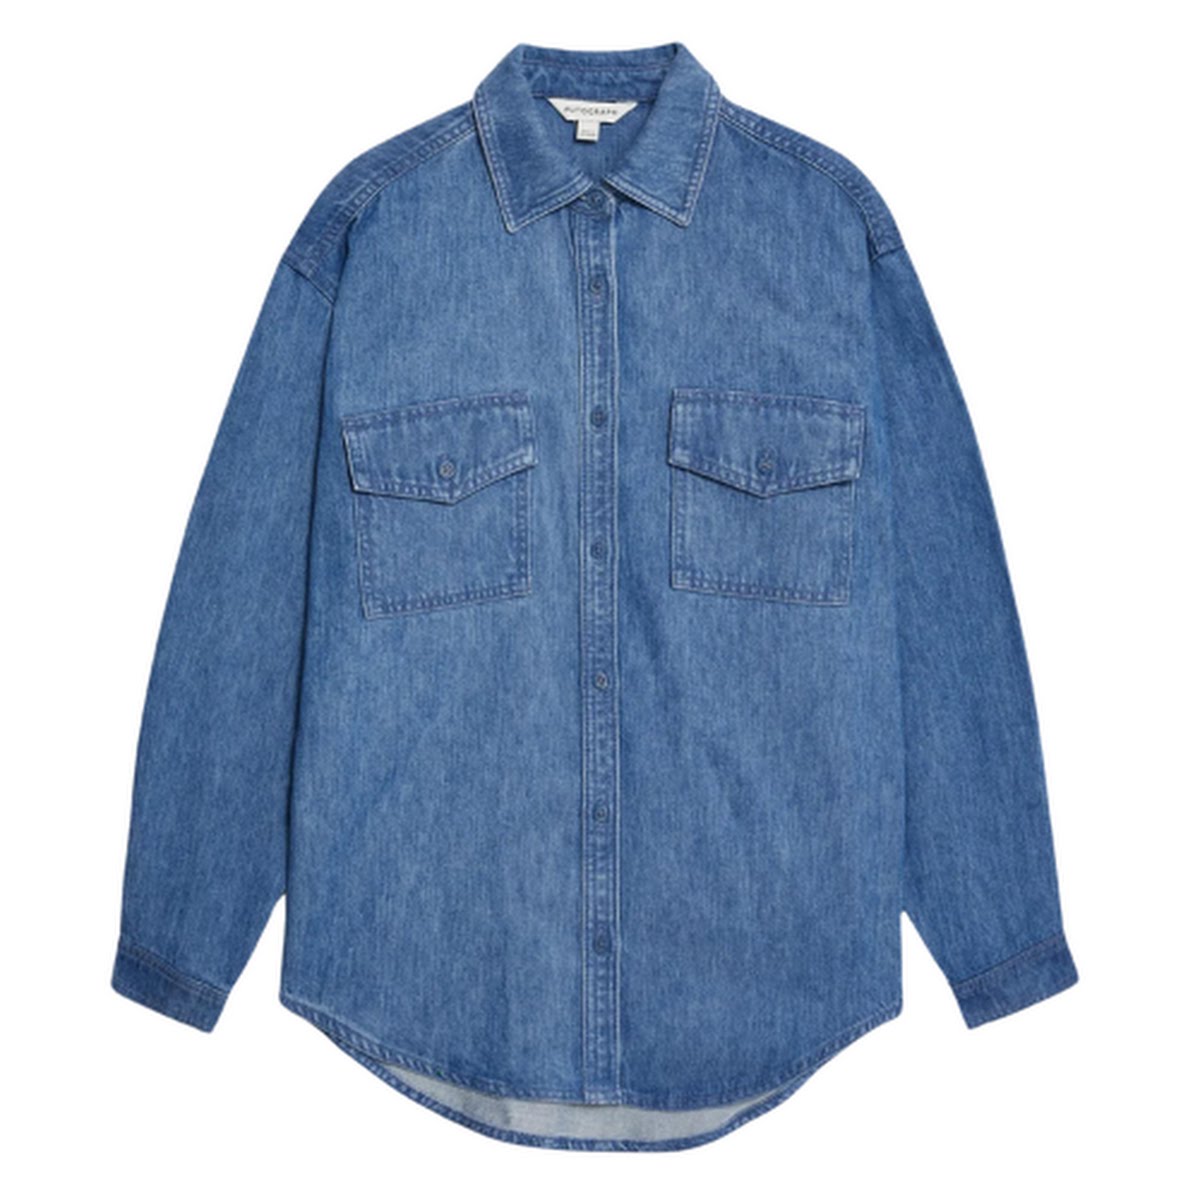 M&S Denim Collared Relaxed Shirt, €70